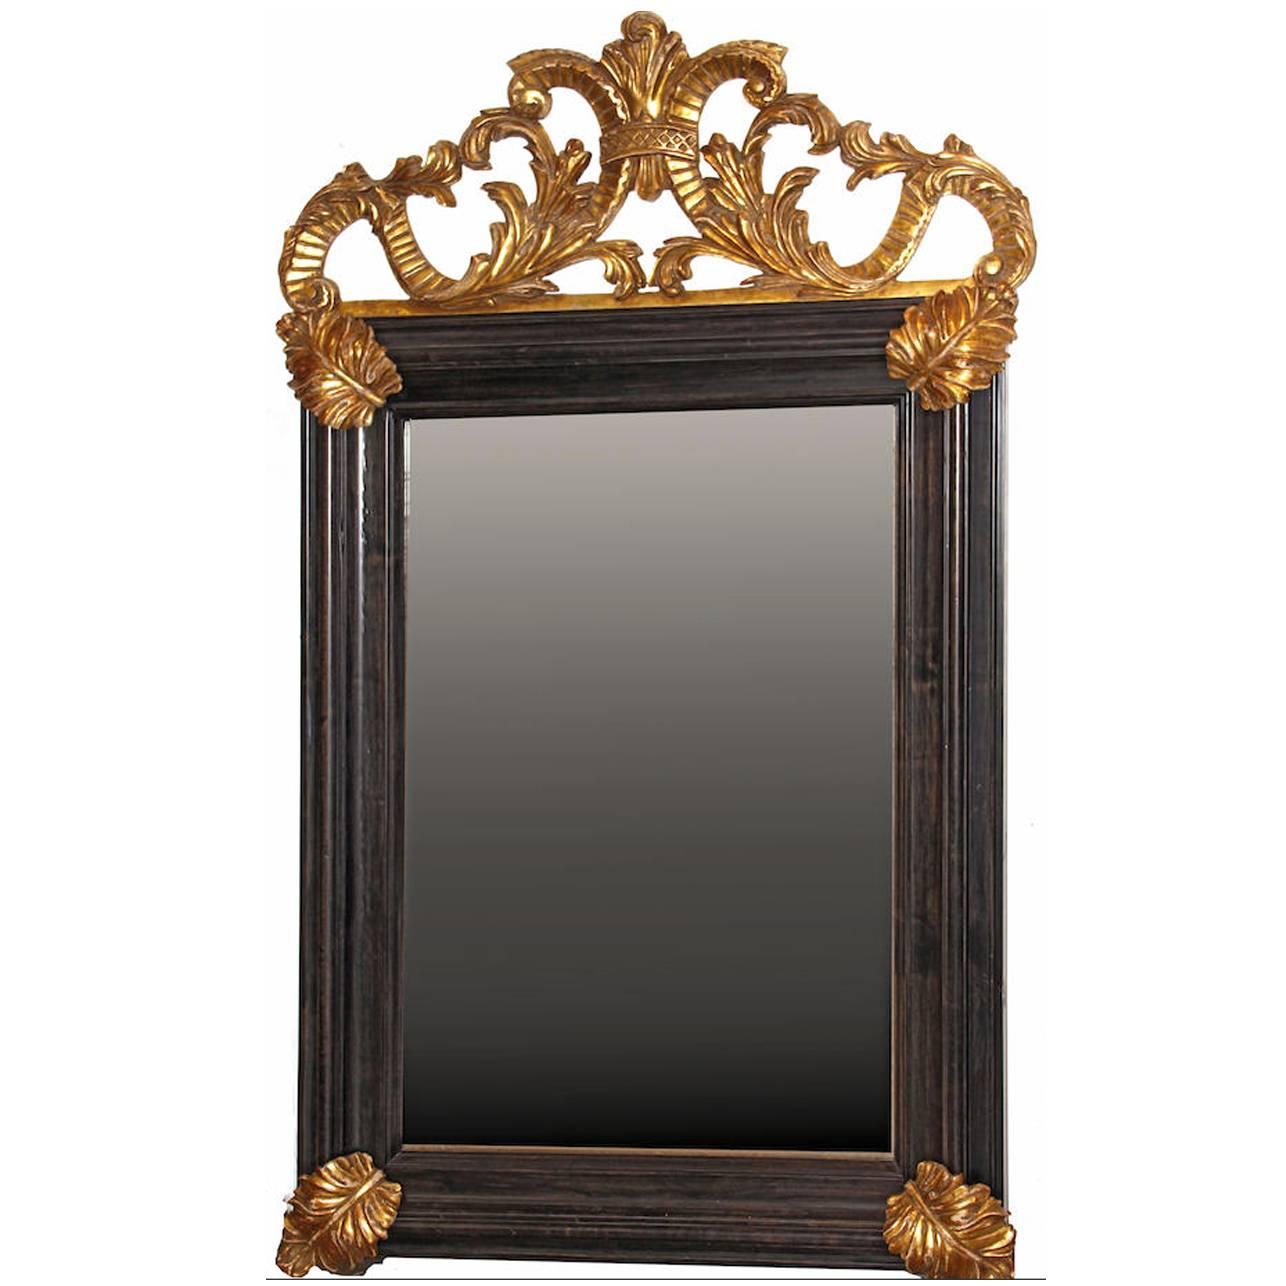 Italian baroque style  Mirror with hand-carved gilt details, aged mirror glass